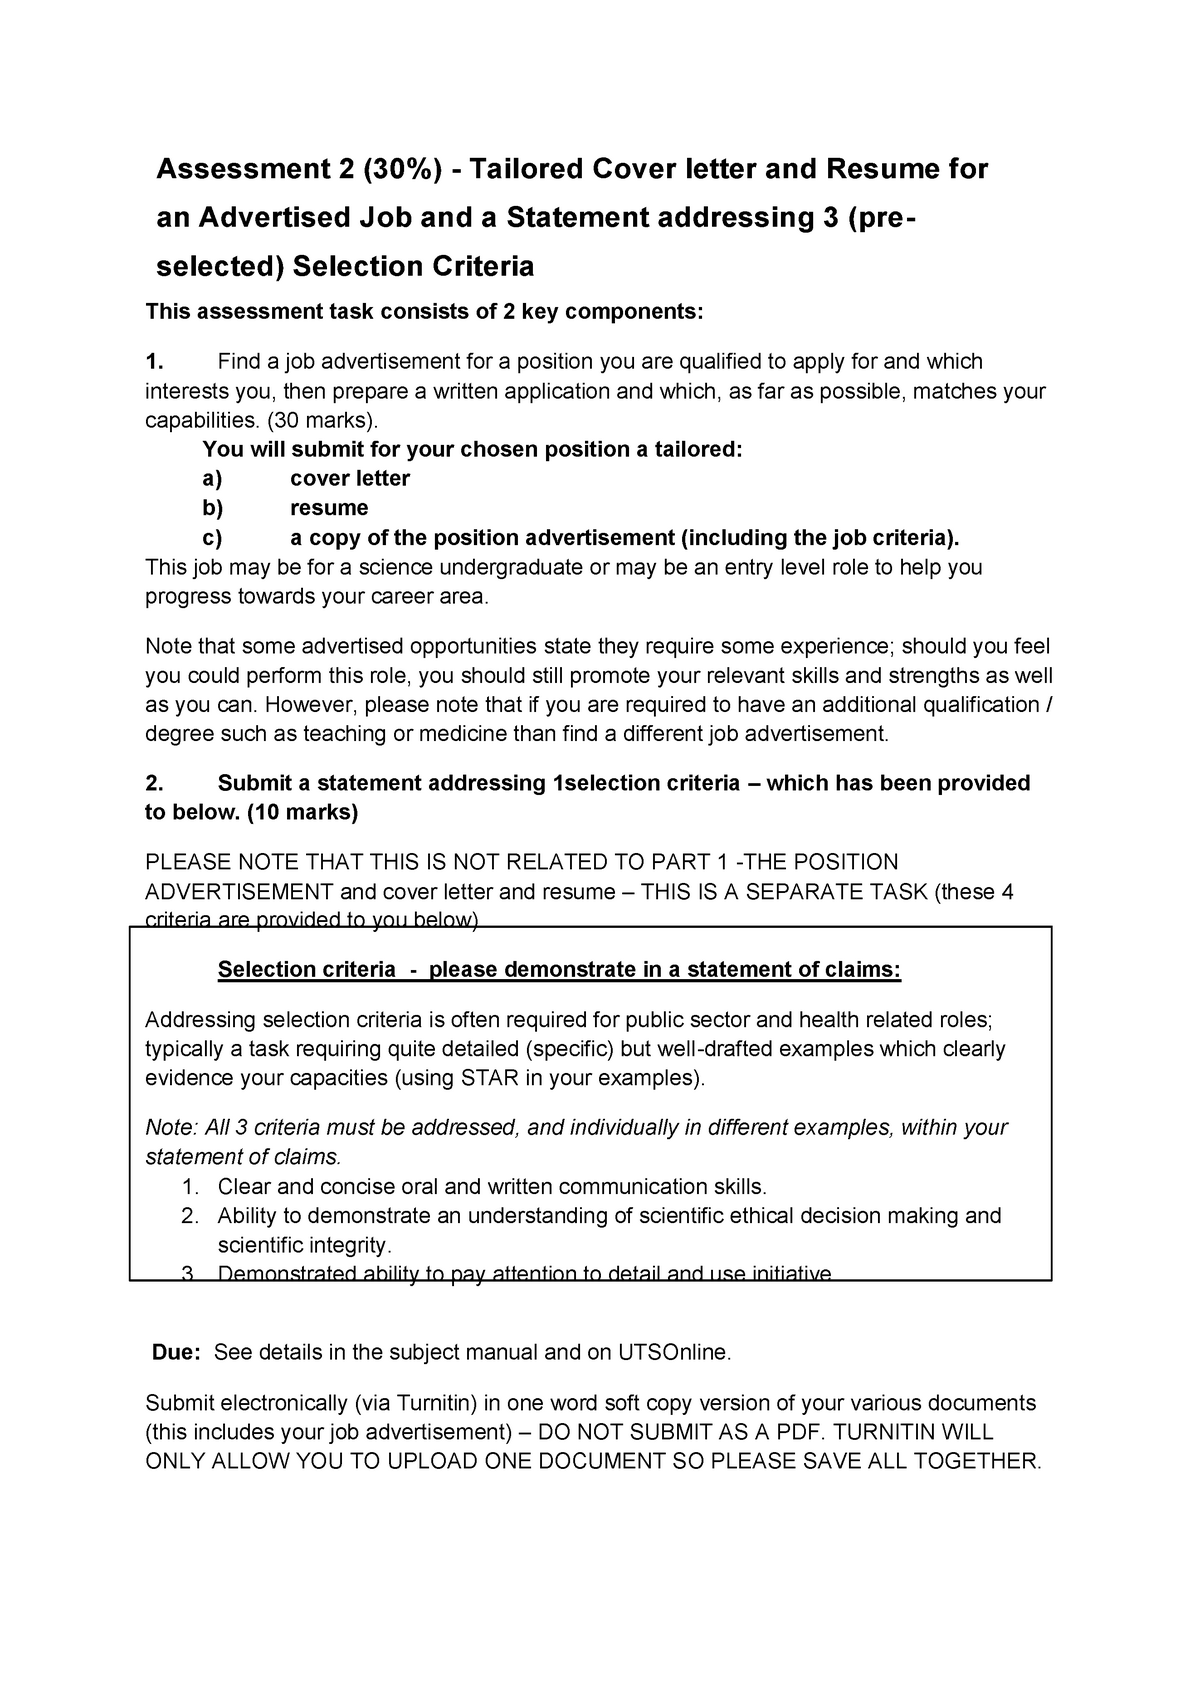 example of cover letter with selection criteria